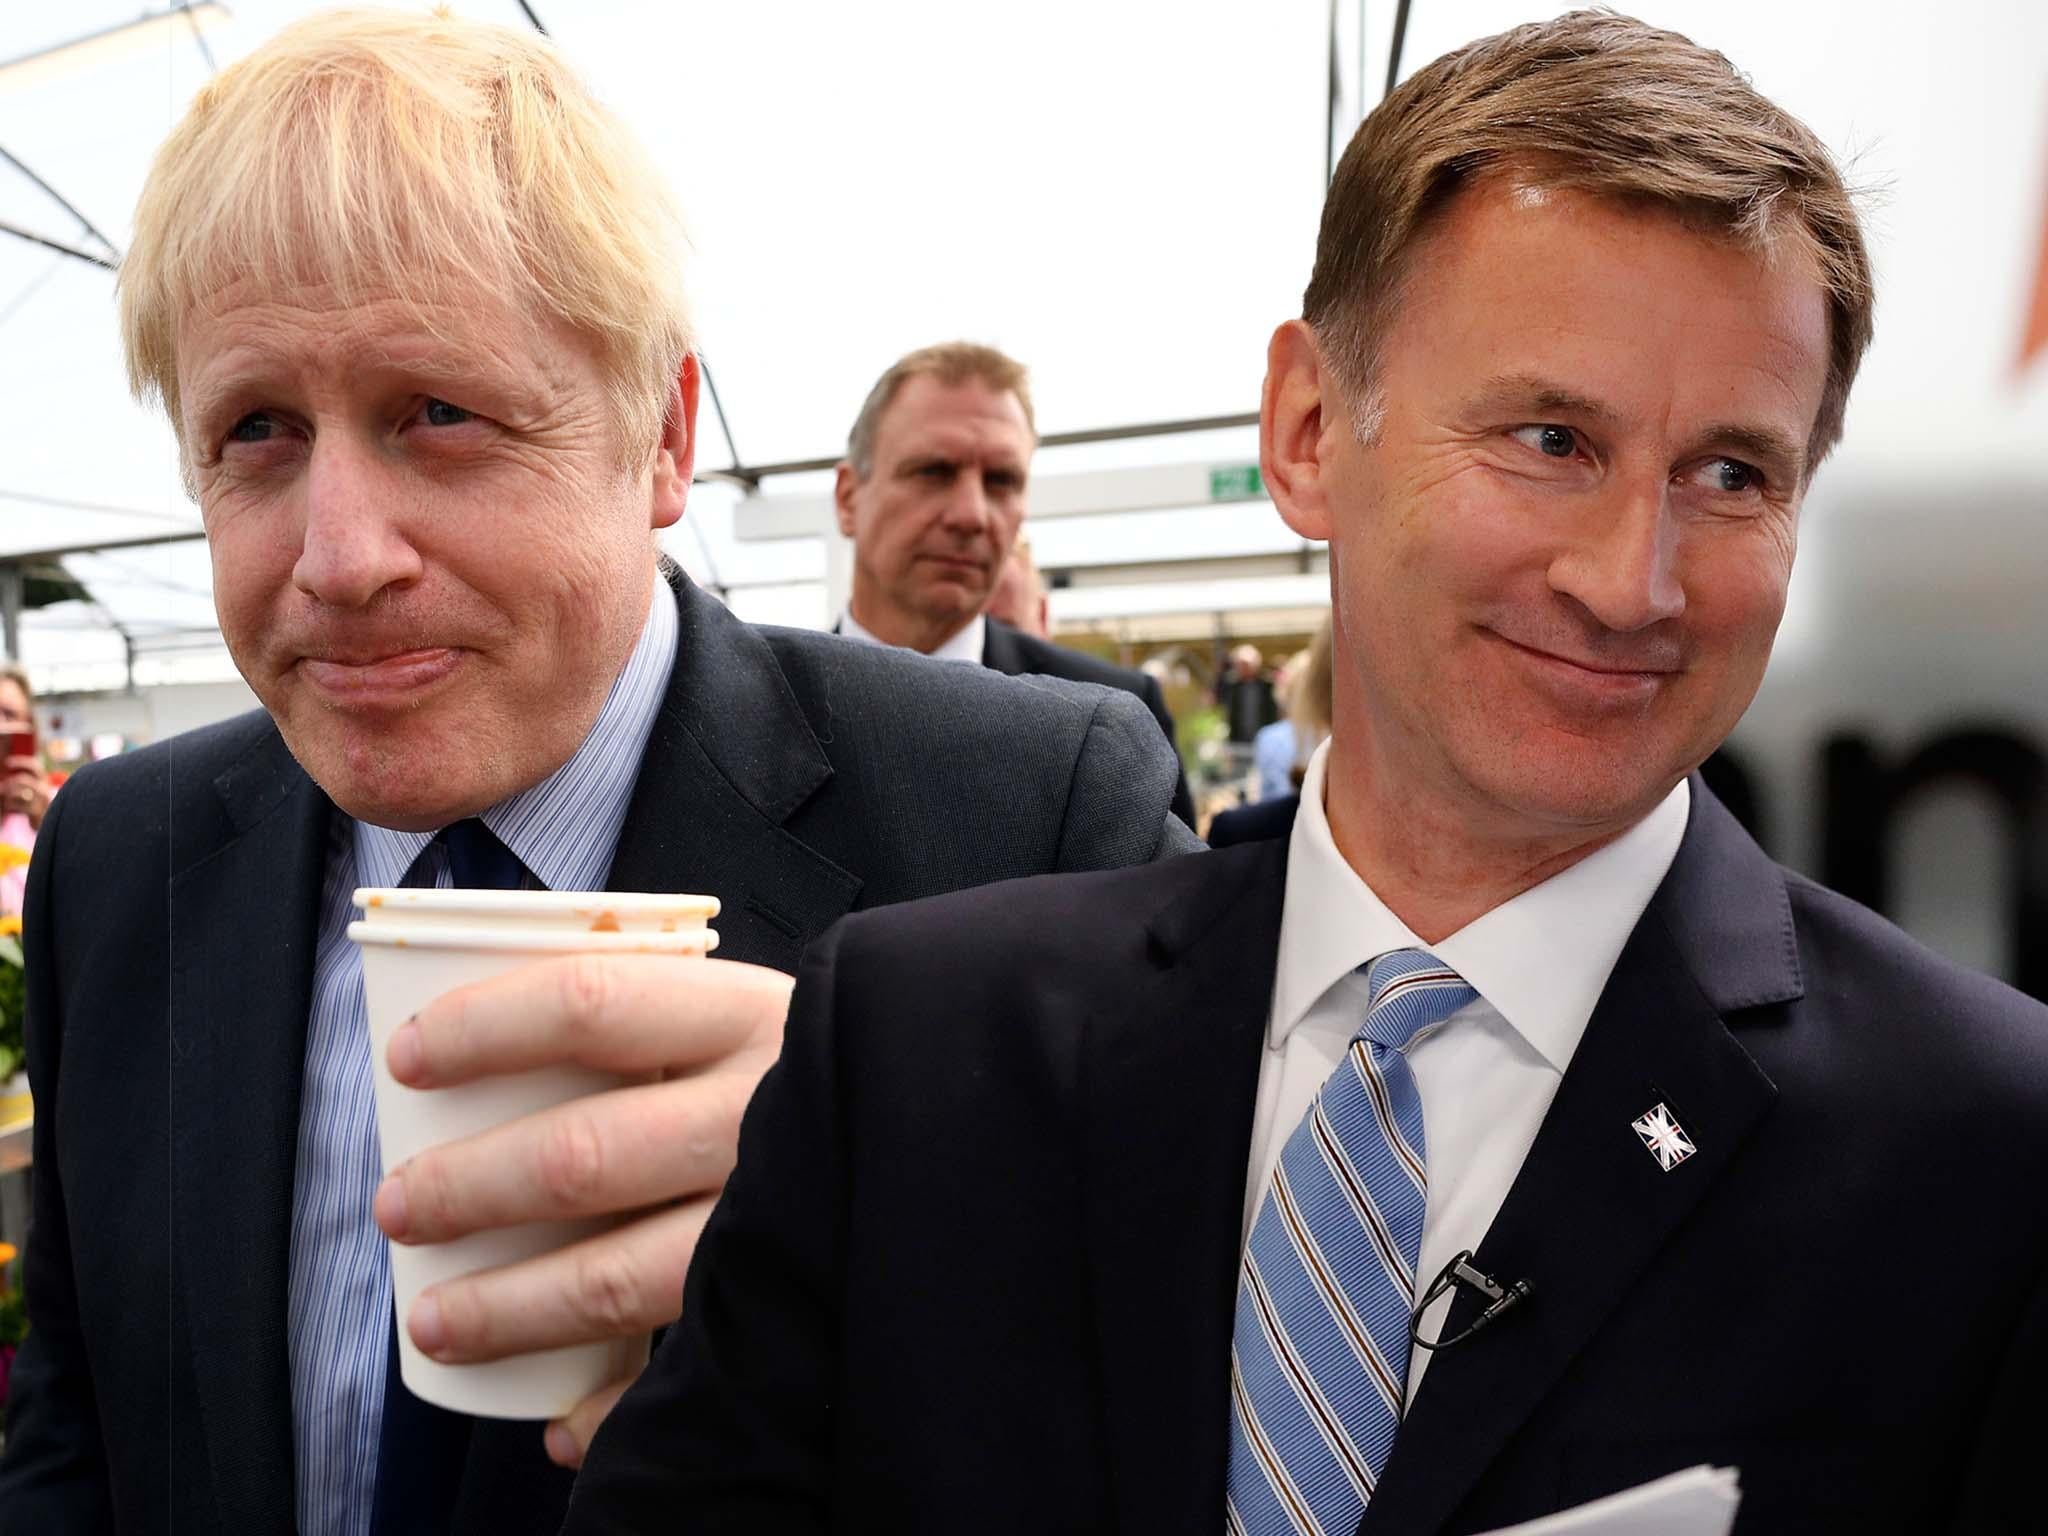 Voters want neither Boris Johnson or Jeremy Hunt to be the next PM, poll shows